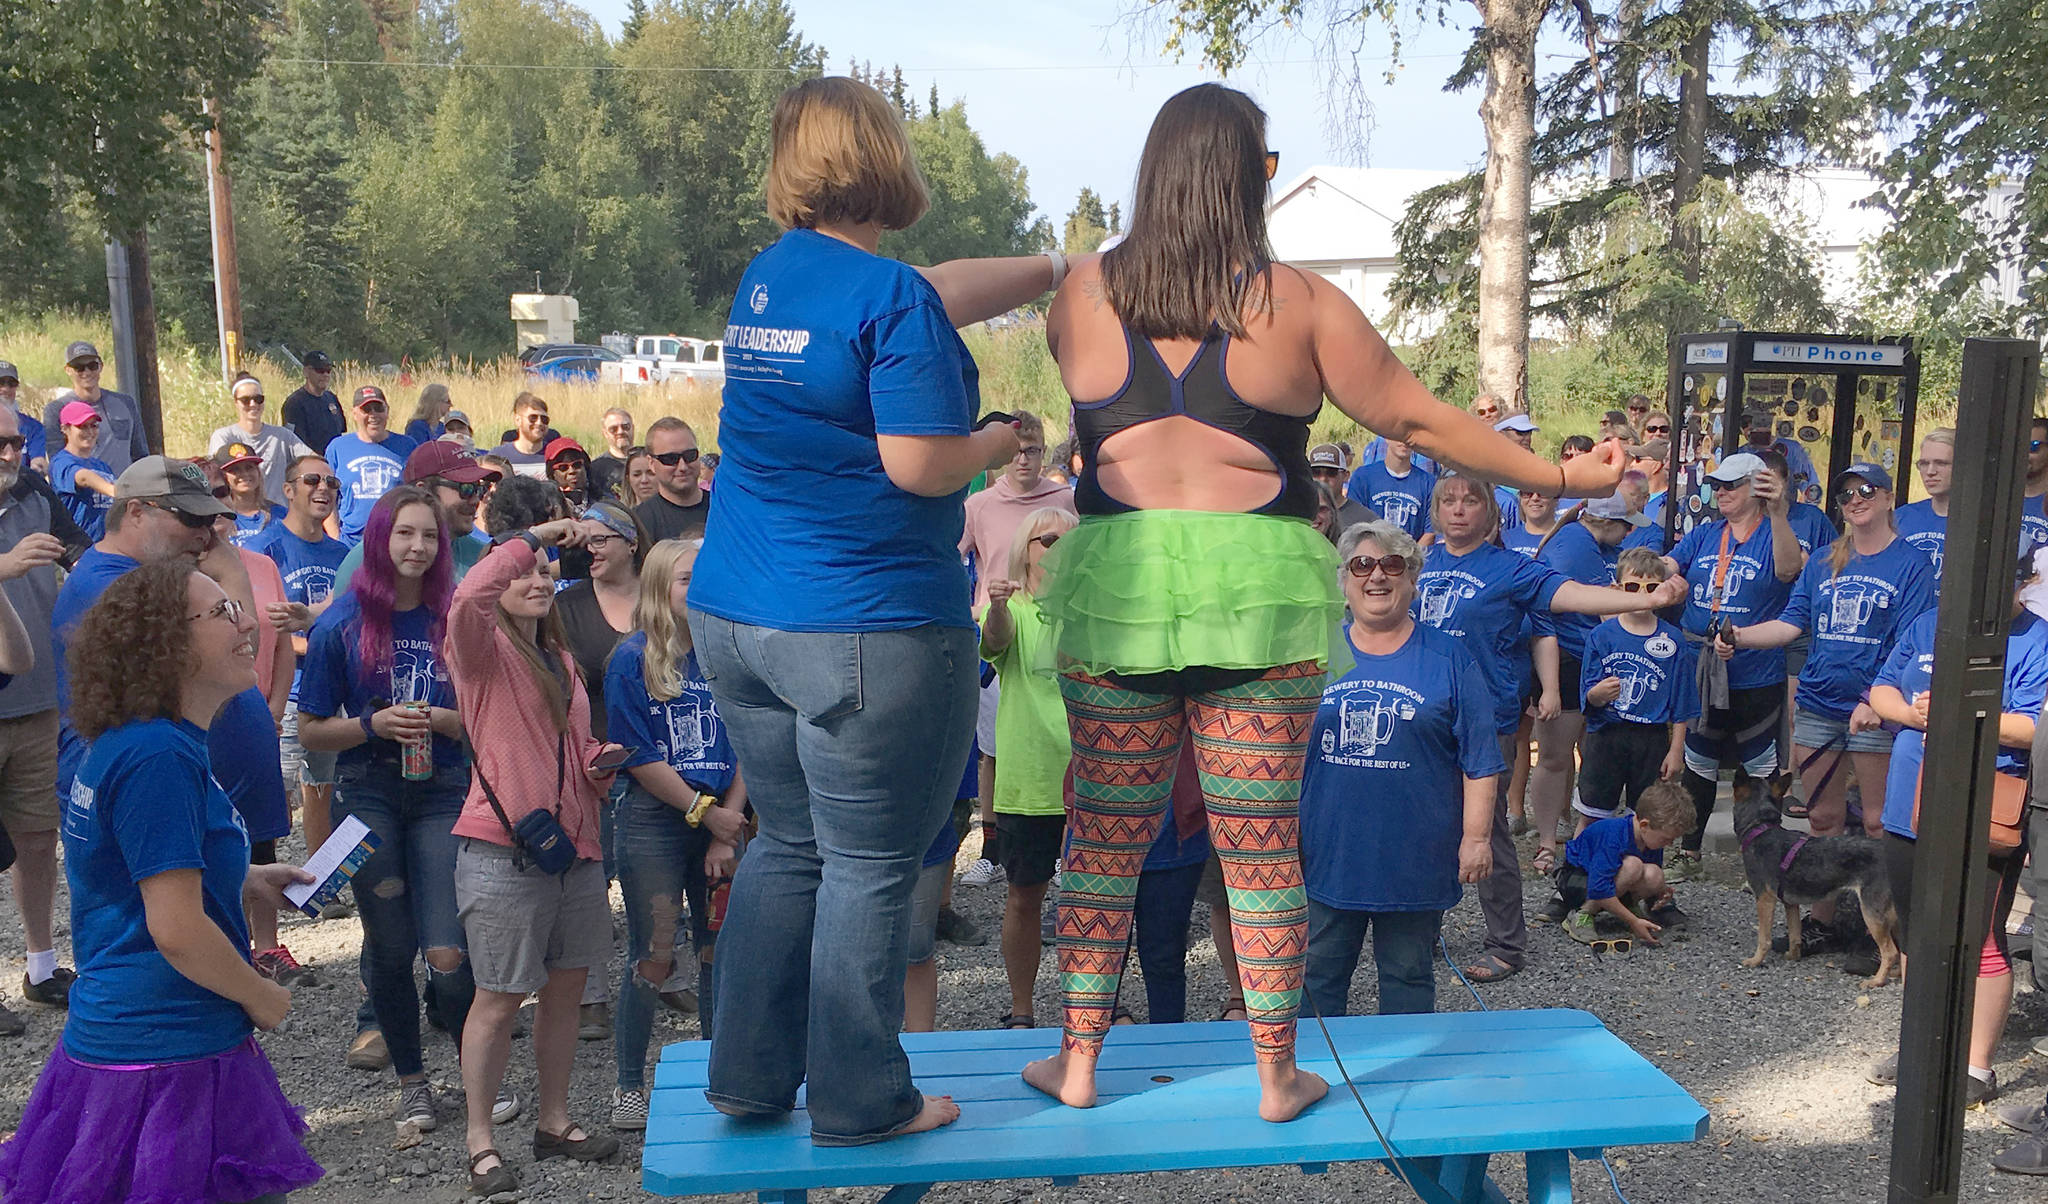 Johna Beech and Nicole Murphy warm up runners before the Brewery to Bathroom .5K “The race for the rest of us” on Sunday, Aug. 11, 2019, in Soldotna, Alaska. (Photo by Jeff Helminiak/Peninsula Clarion)